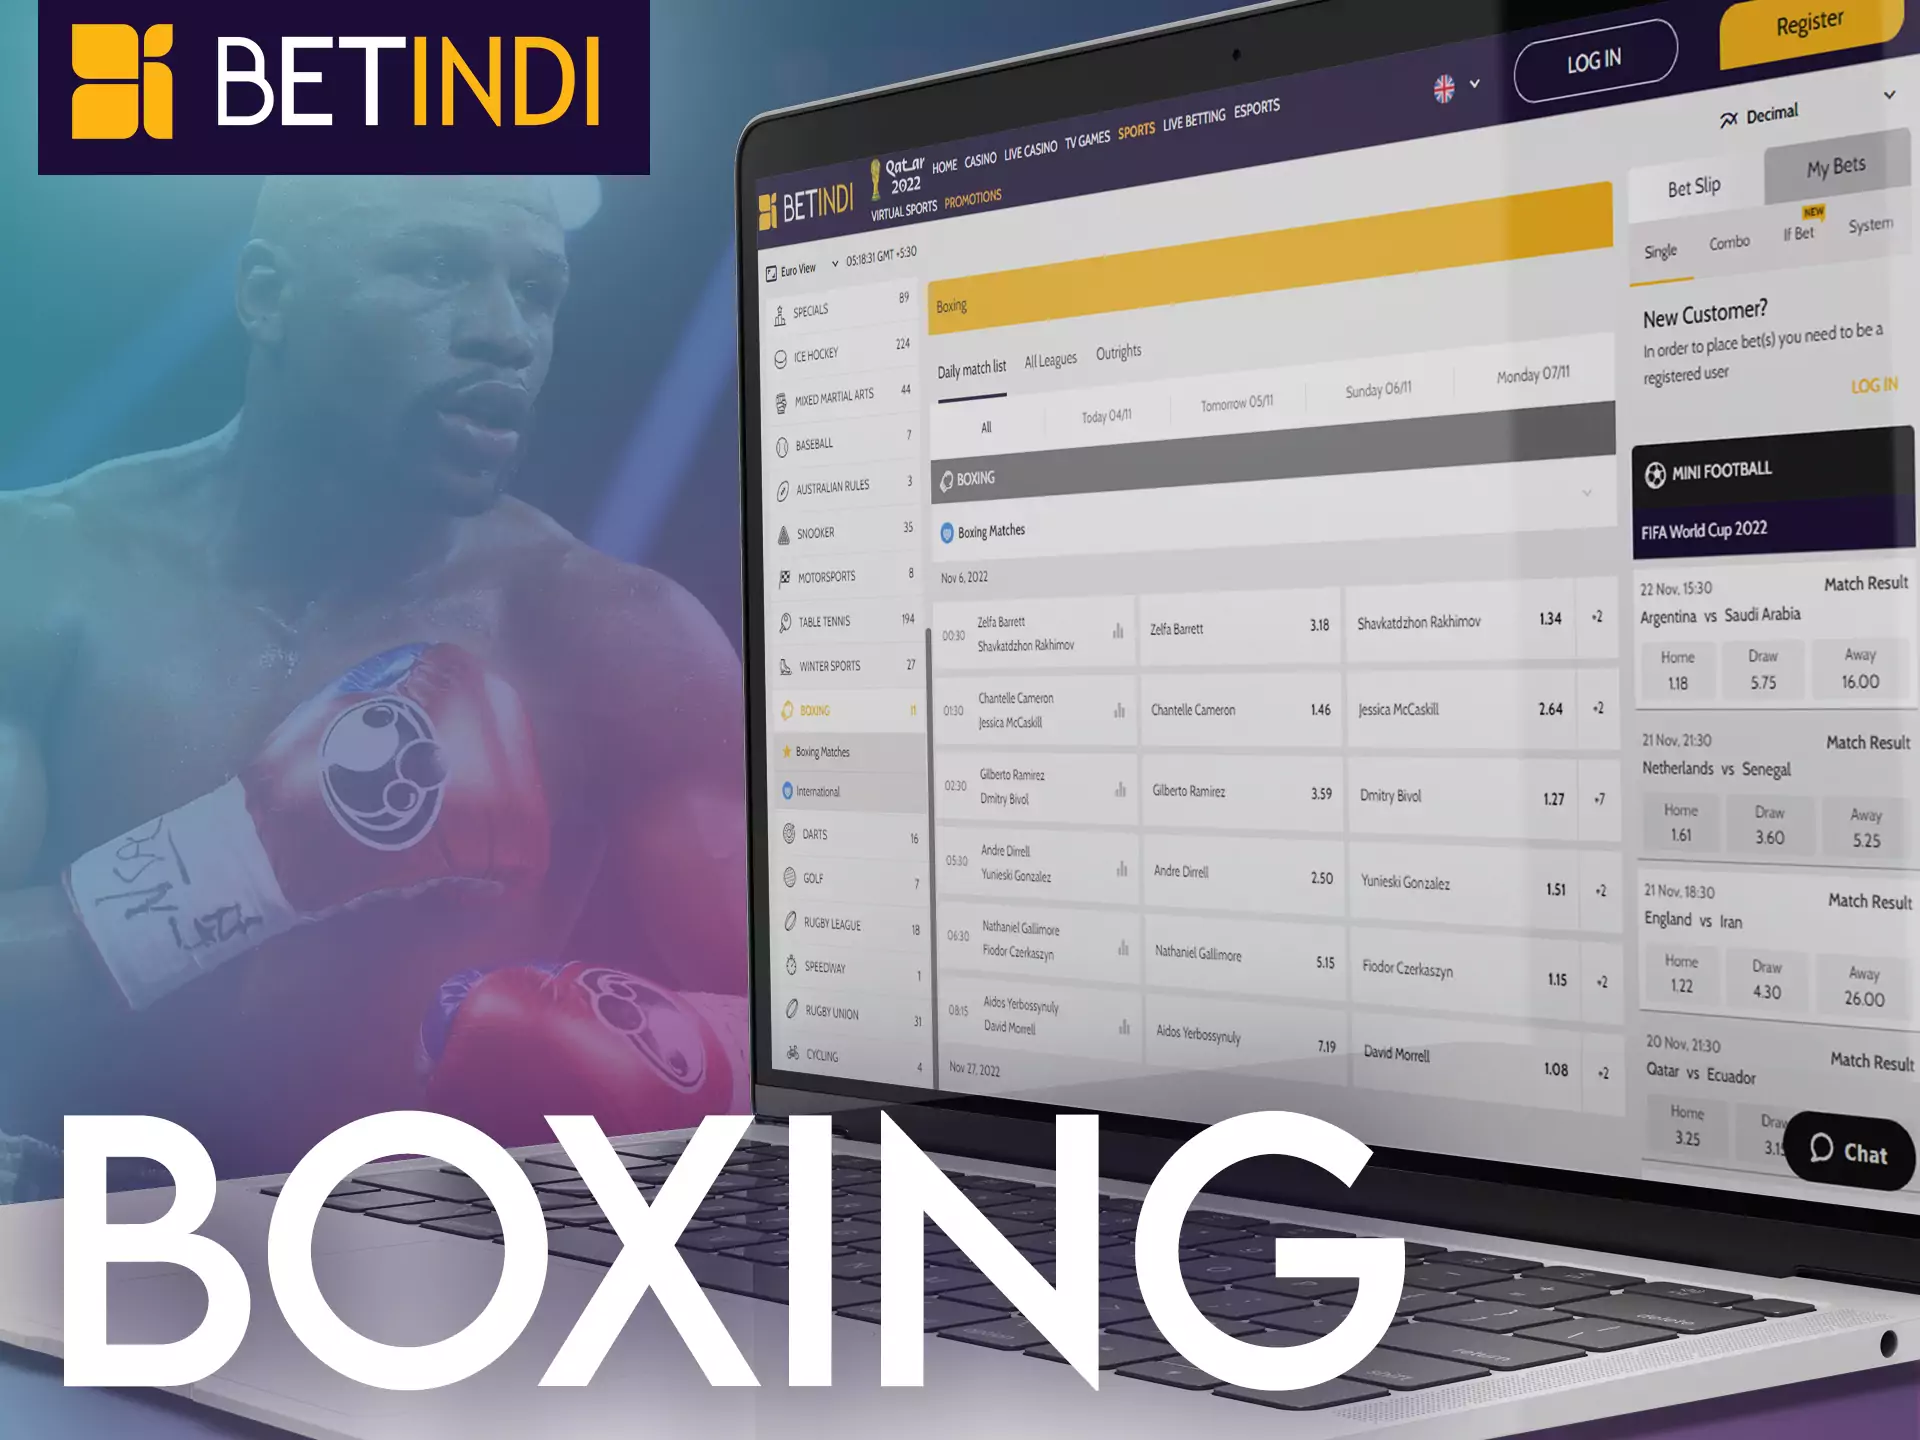 Place bets on your favorite boxer with Betindi, share the victory with him.